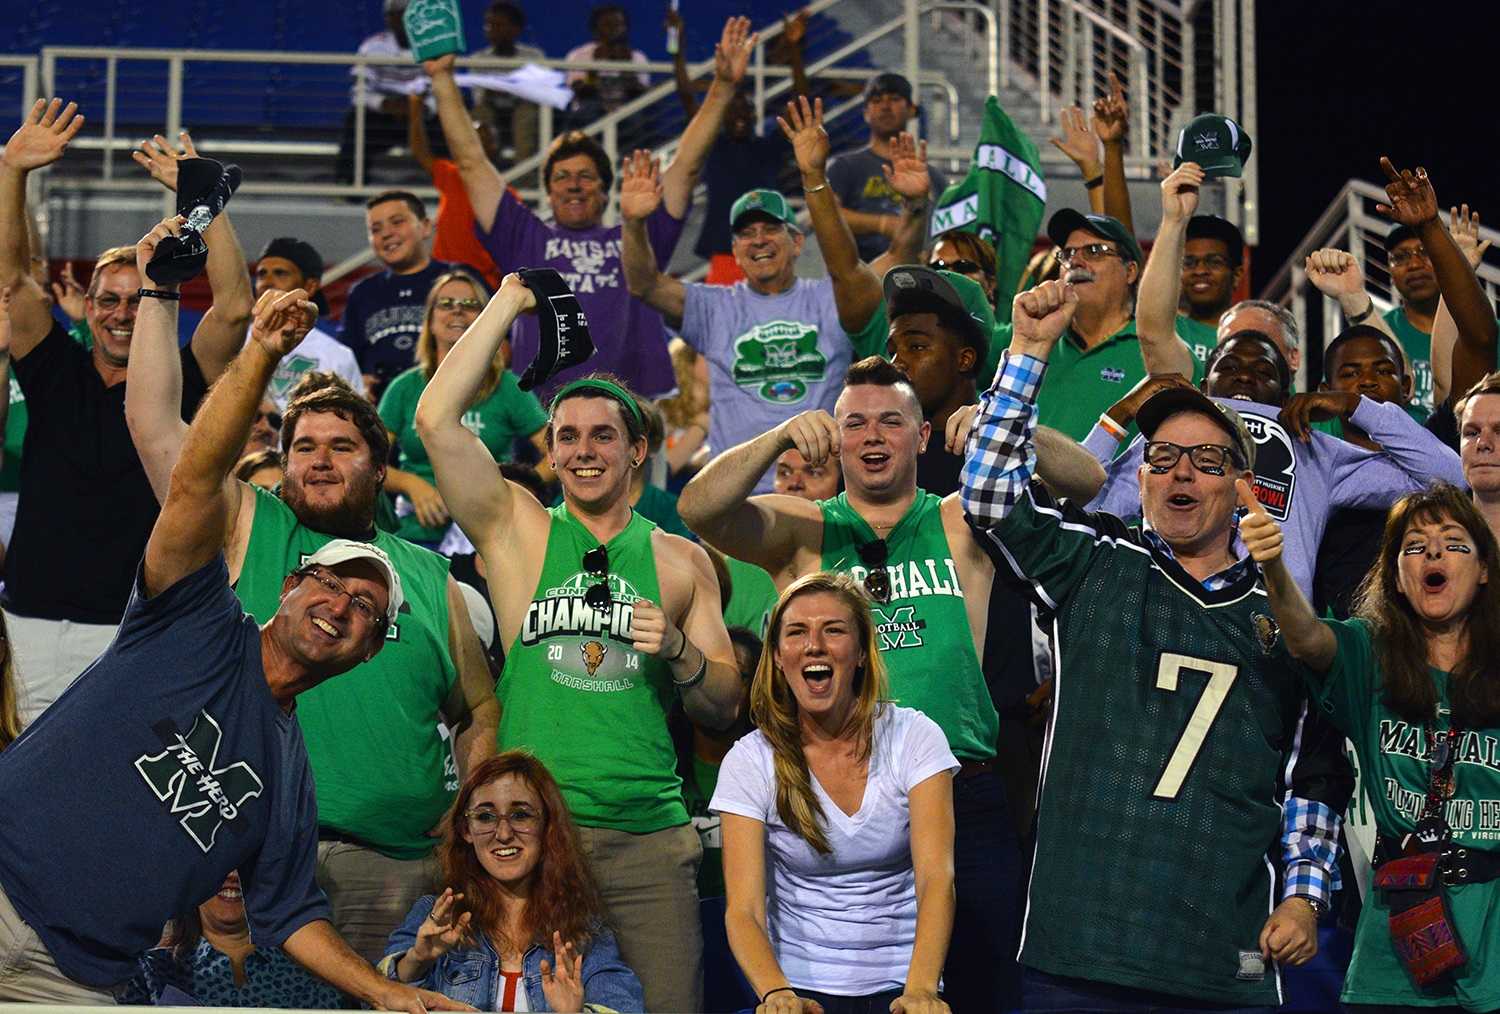 Known for having a strong contingent in south Florida, Marshall fans made up a significant portion of the announced 29,419 who attended the Boca Raton Bowl. 